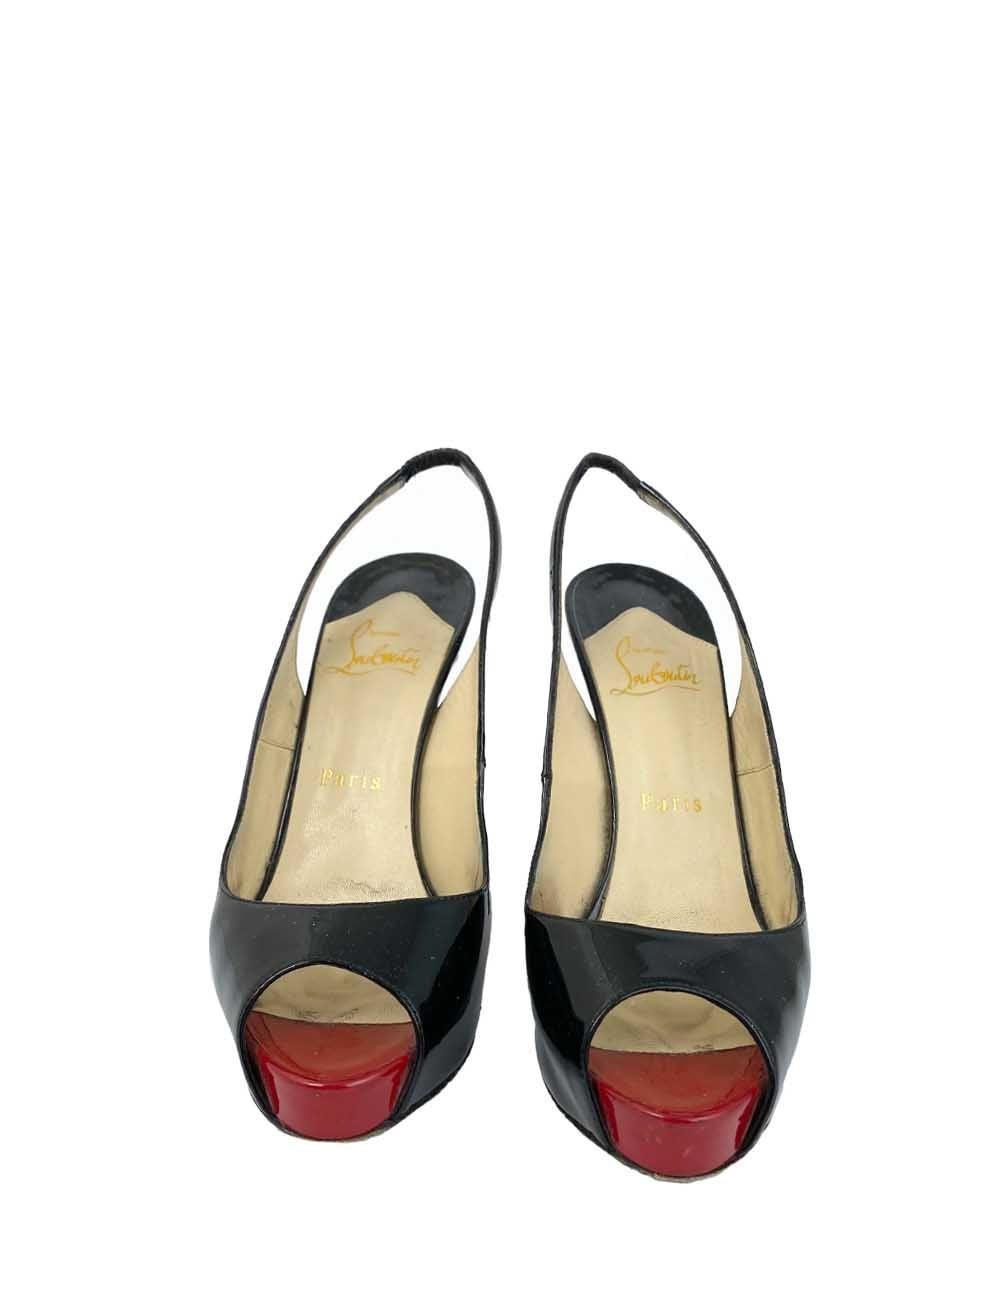 Christian Louboutin Black patent leather peep toe pumps, with red soles.
Additional information:
Material: Leather
Size: EU 37.5
Heel Length: 12 cm
Overall Condition: Good
Interior Condition: color change.
Exterior Condition: Leather scratches and